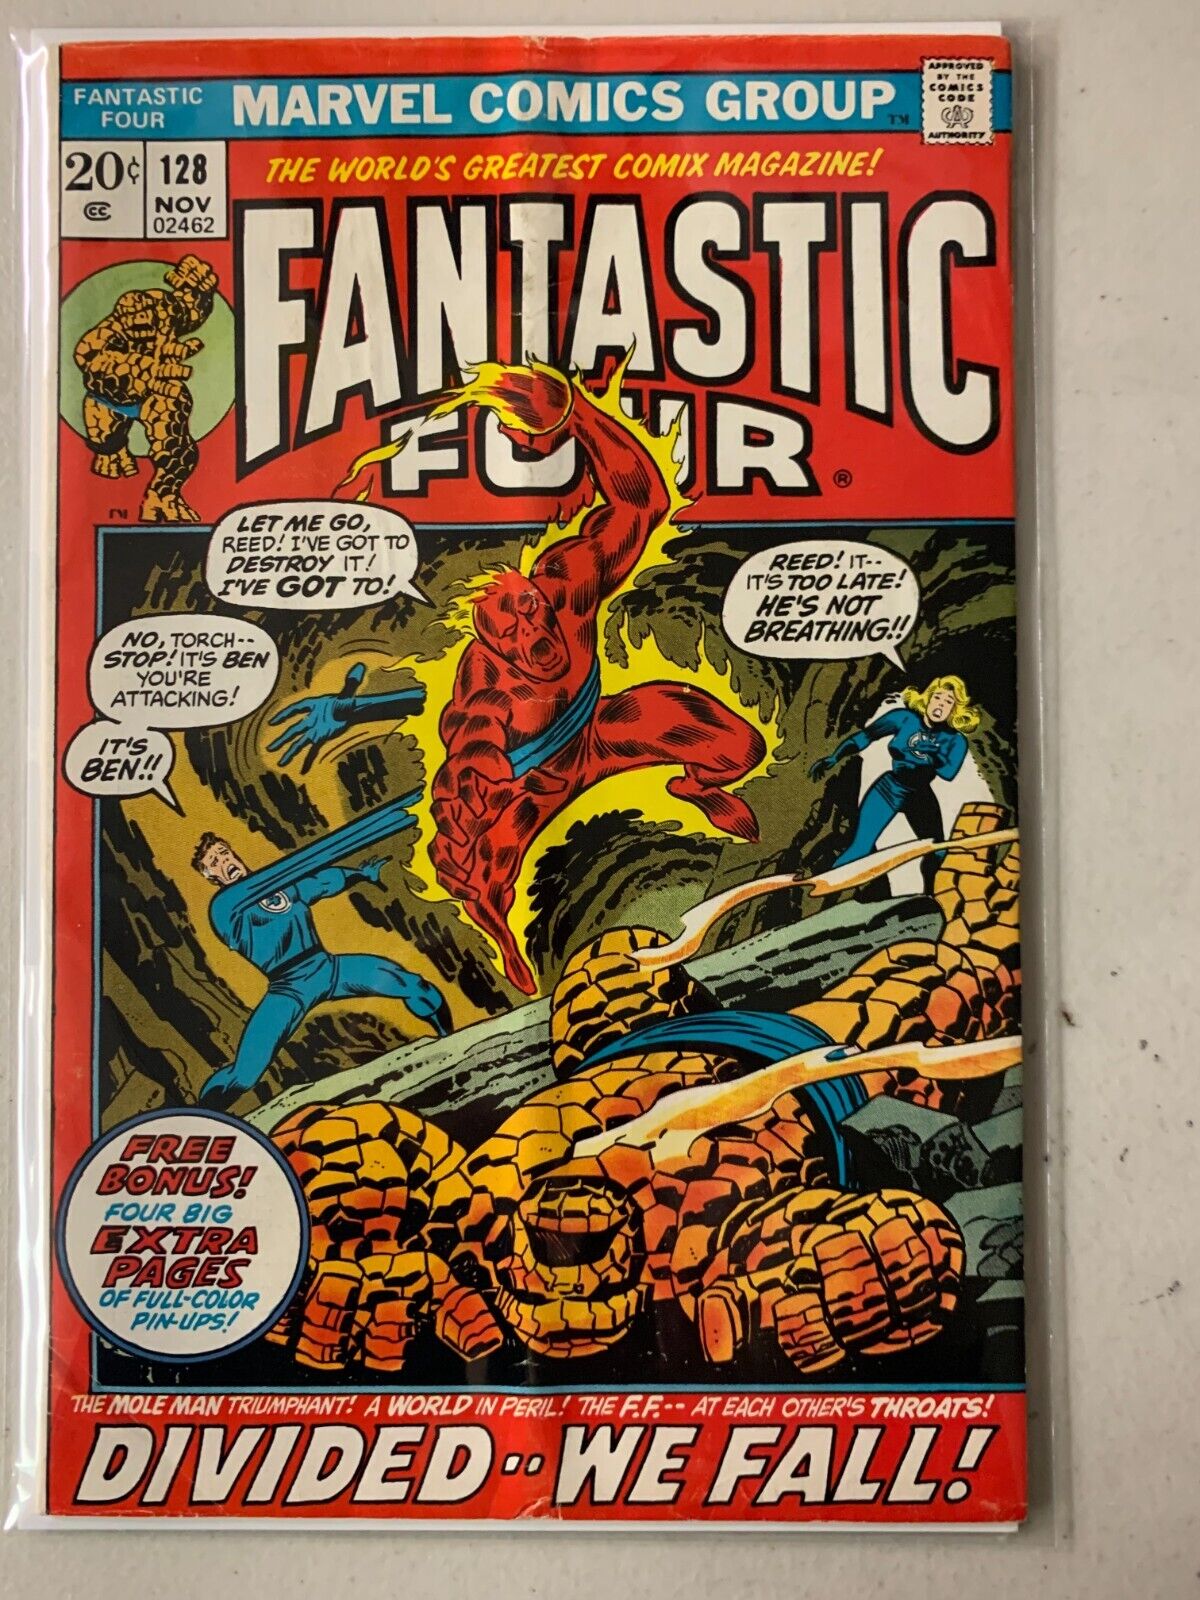 Fantastic Four #128A with gloss insert 5.0 (1972)